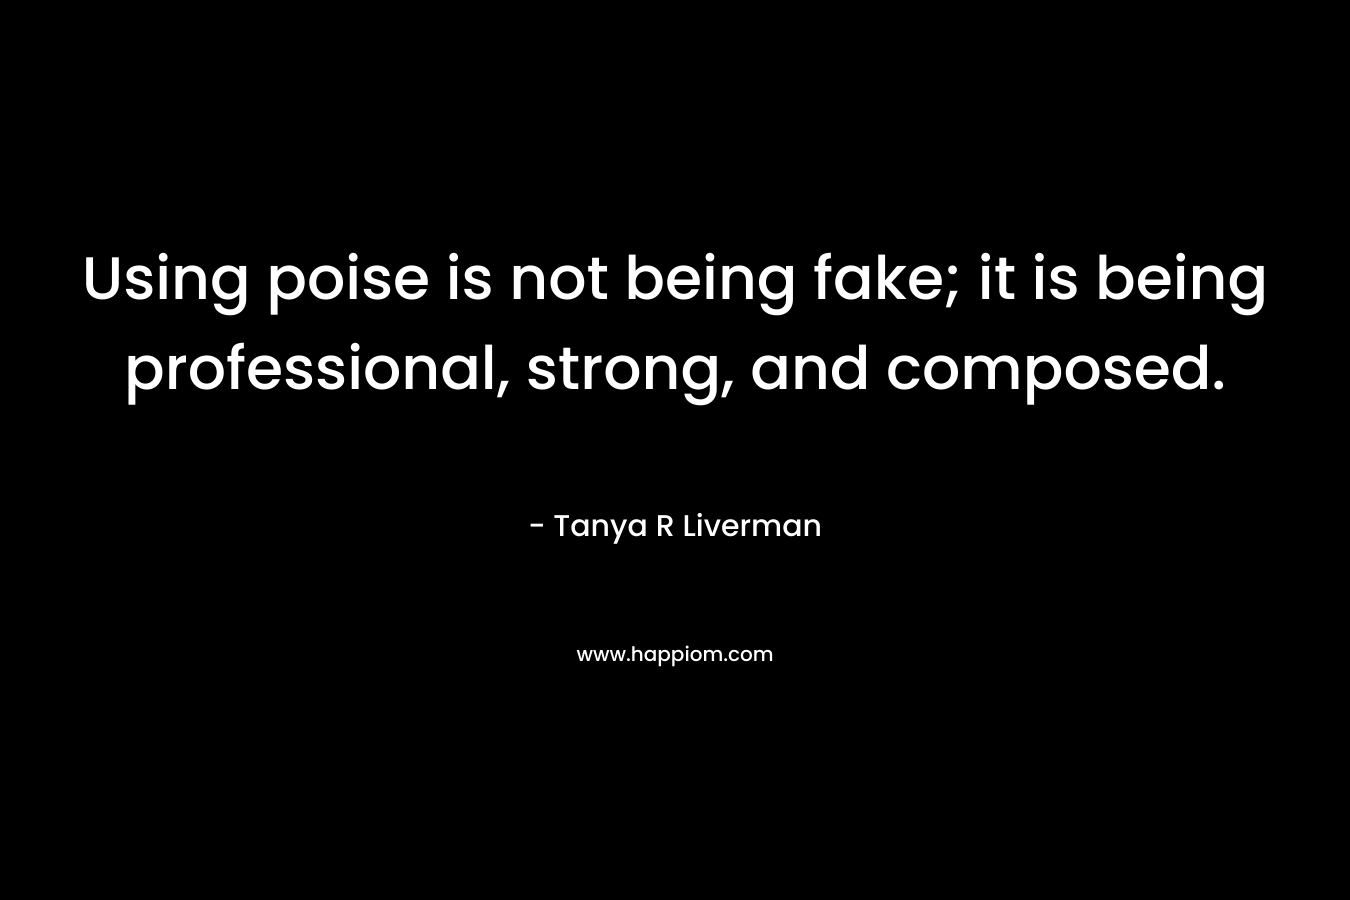 Using poise is not being fake; it is being professional, strong, and composed.